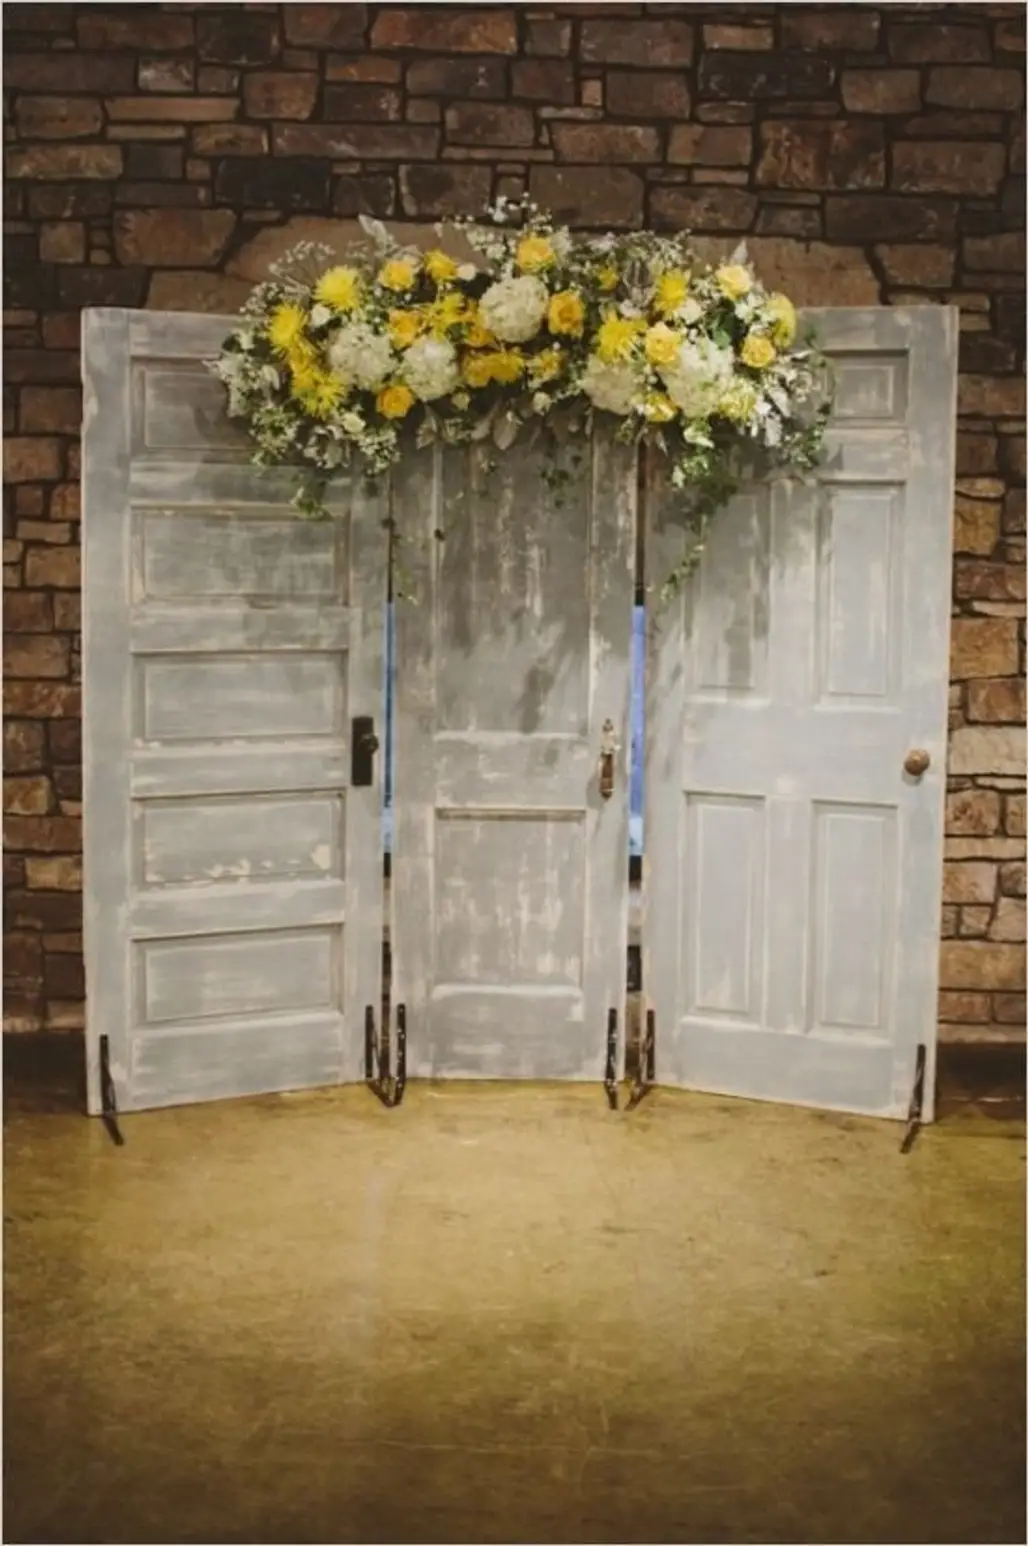 Doors with Yellow Floral Arrangement as a Ceremony Backdrop